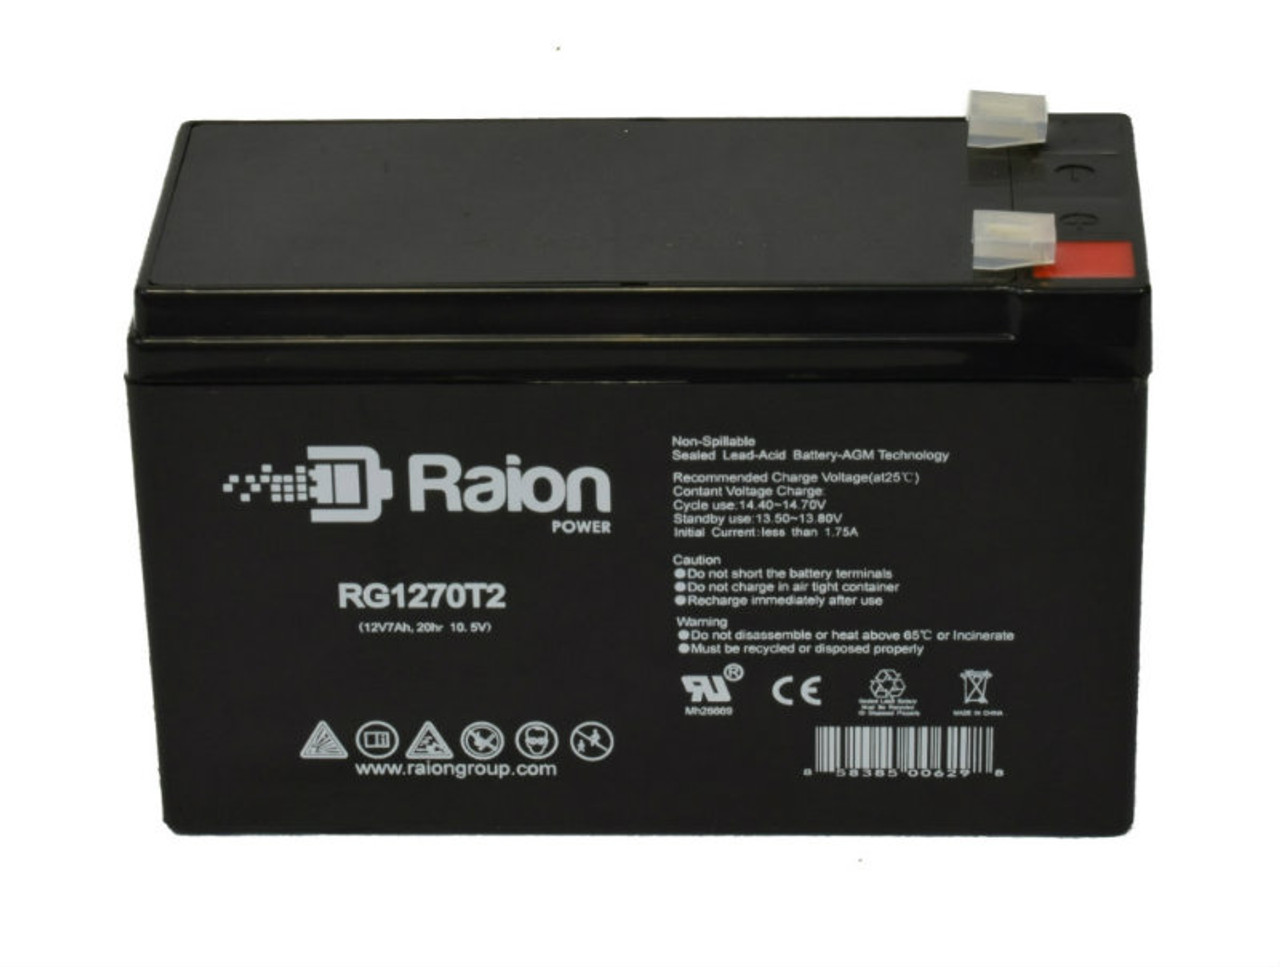 Raion Power RG1270T2 12V 7Ah Lead Acid Battery for TOBBI 12V Battery-Powered Toy Tractor with Trailer